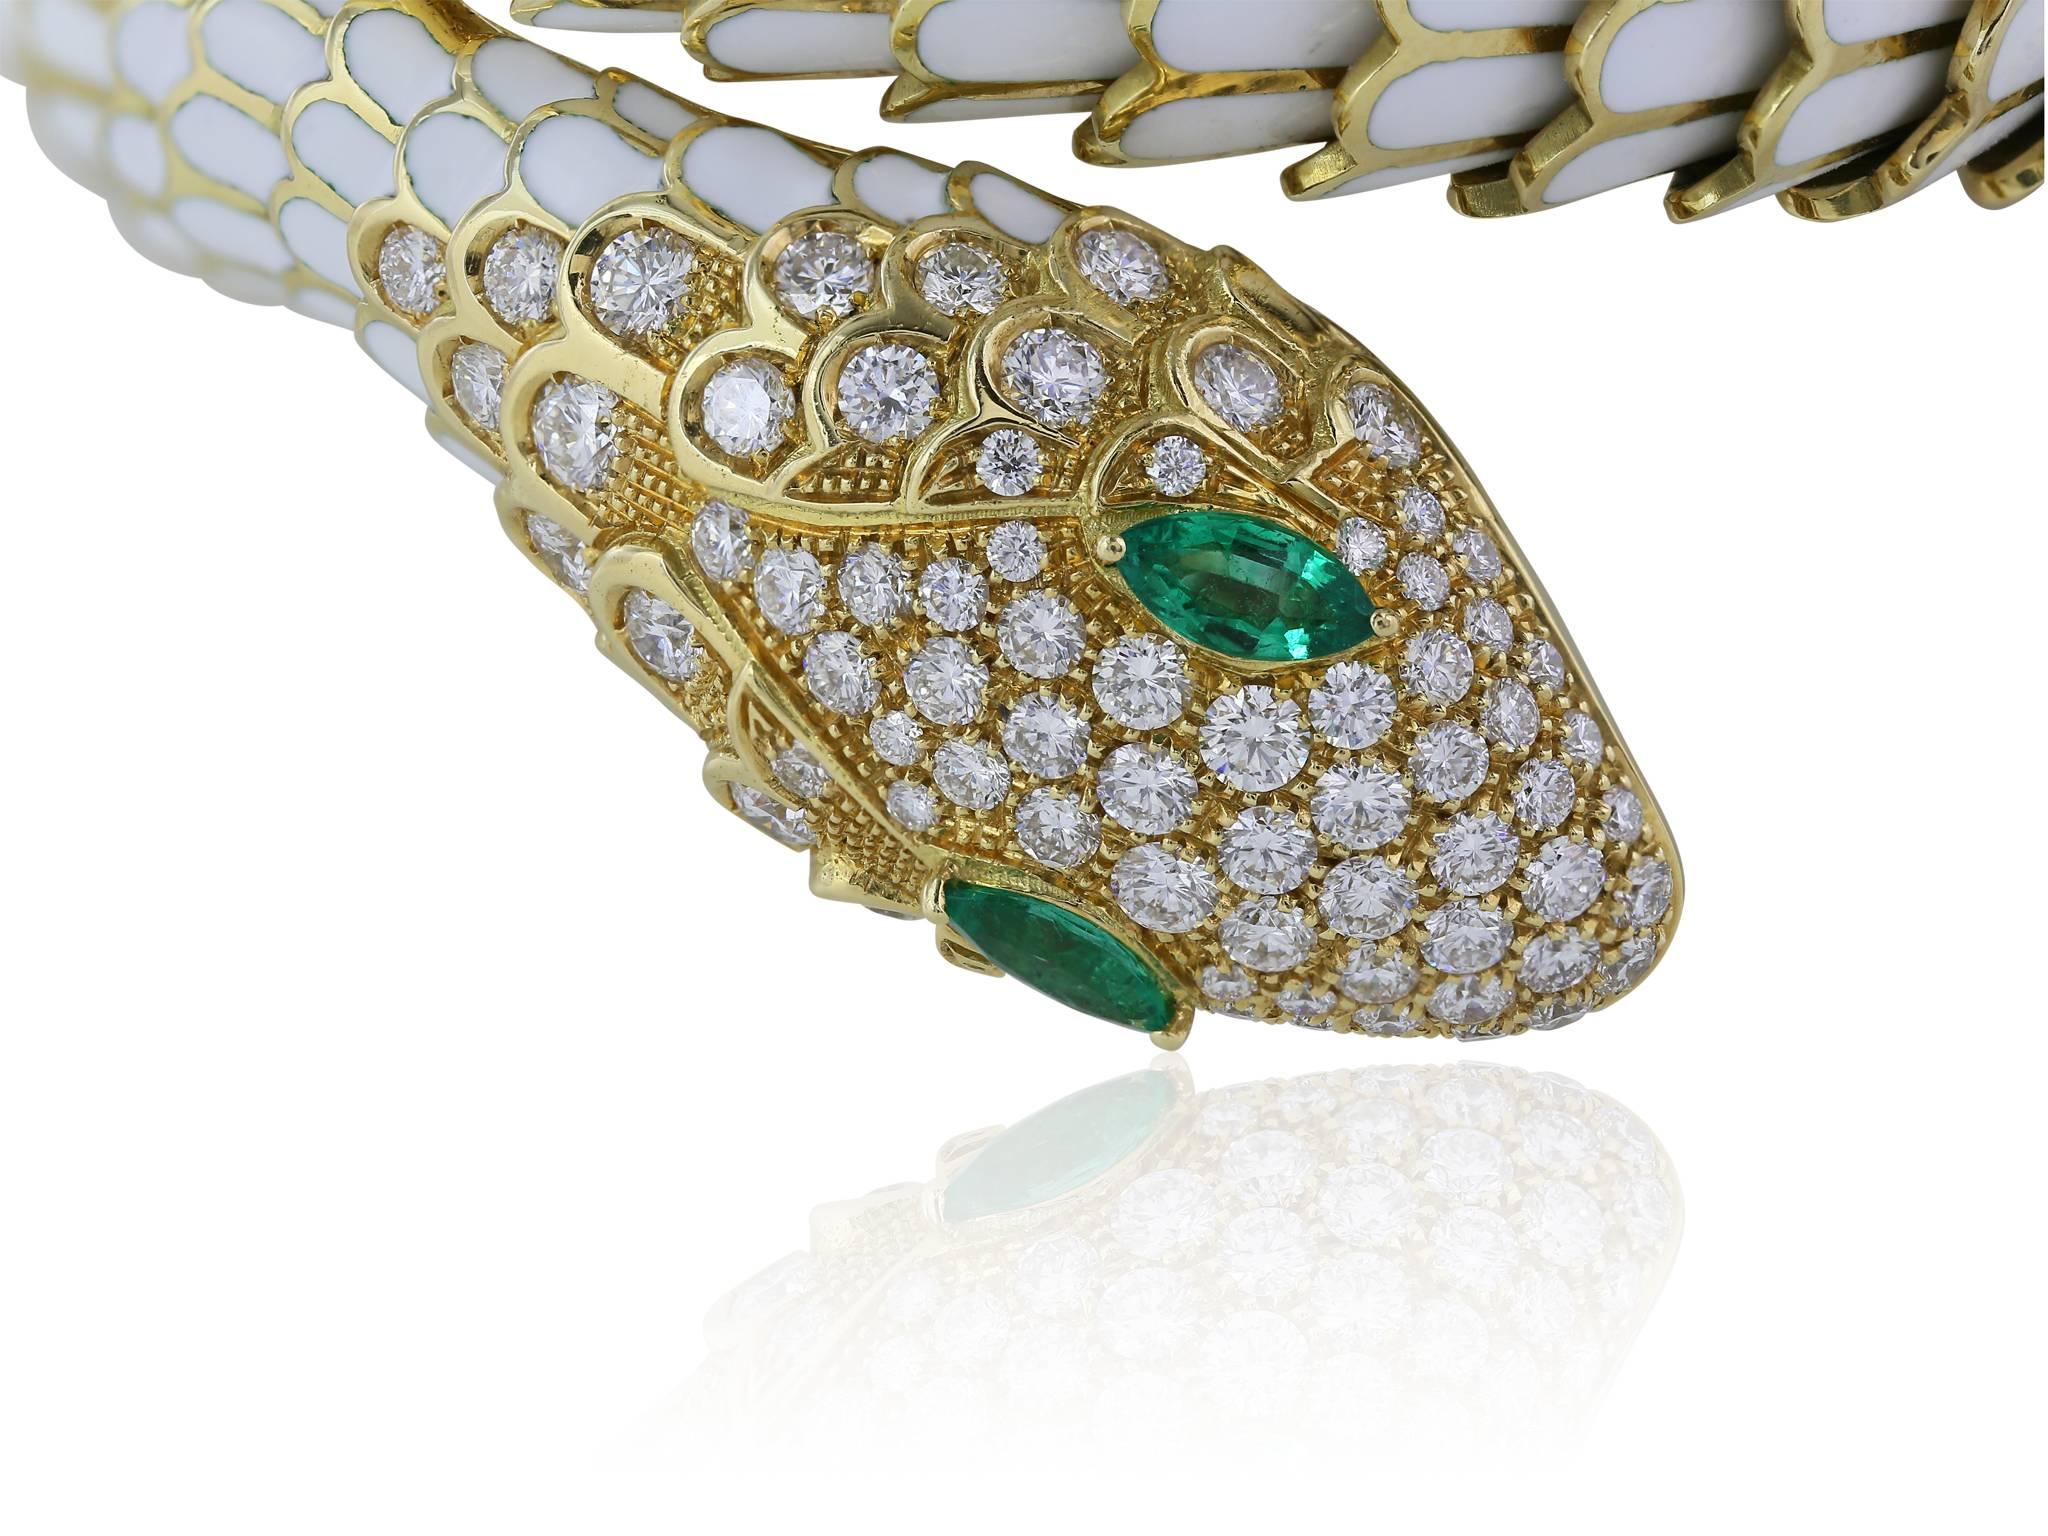 18 karat yellow gold diamond and emerald eye coiling snake bracelet, white enamel on each individual scale, full cut diamonds accenting the face and tip of the tail, with a weight of 2.48 carats with a color and clarity of F VS1-VS2 respectively,